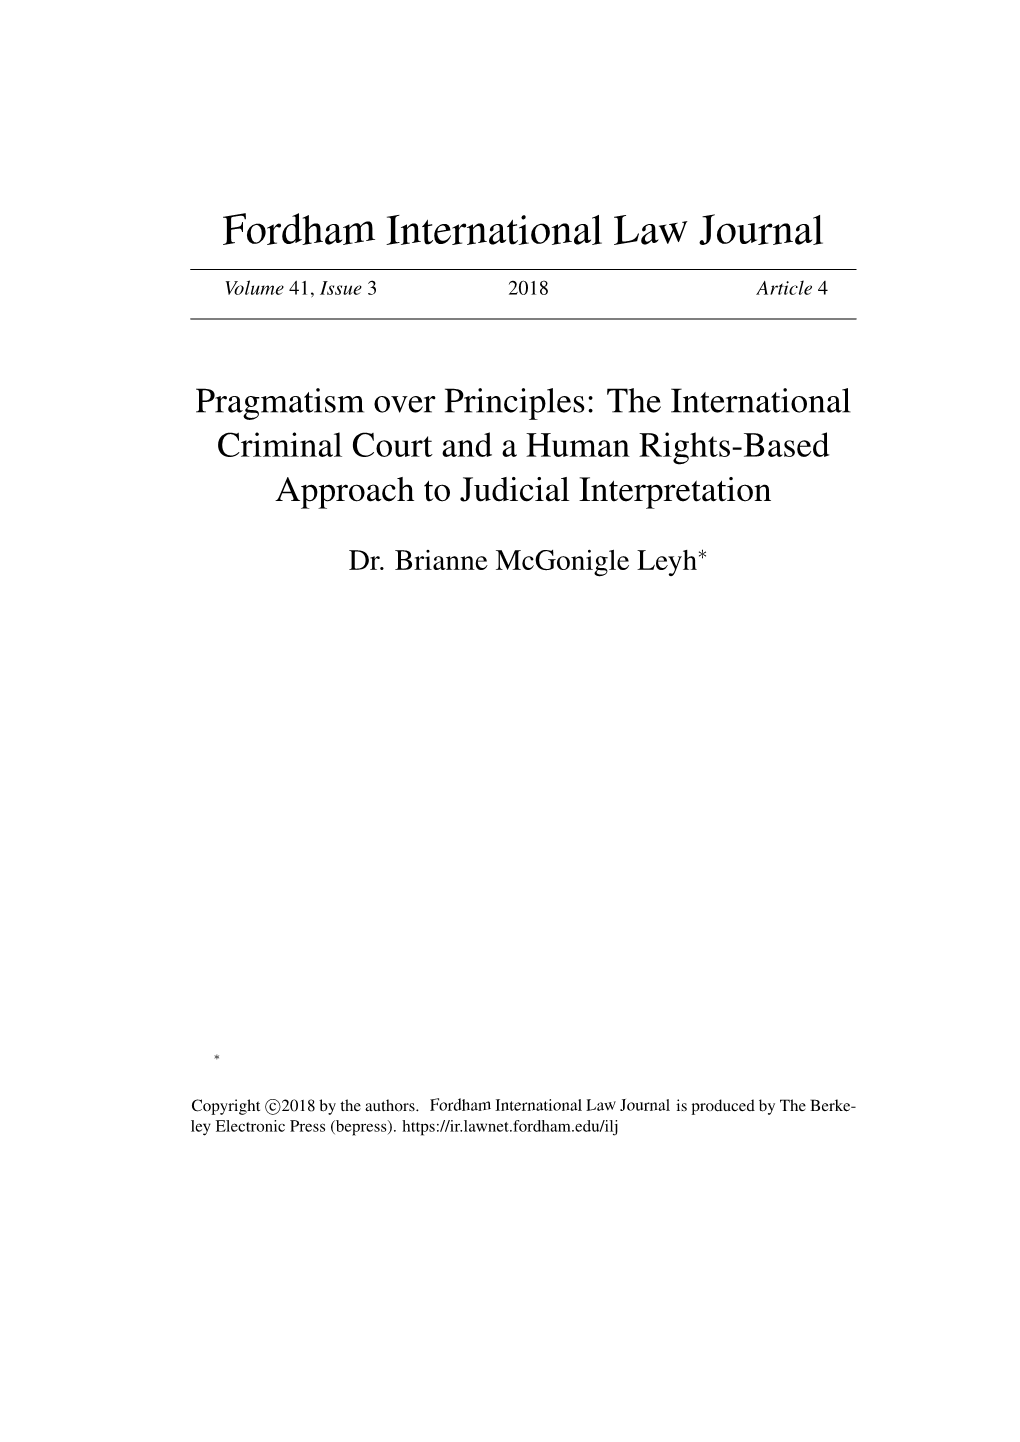 The International Criminal Court and a Human Rights-Based Approach to Judicial Interpretation